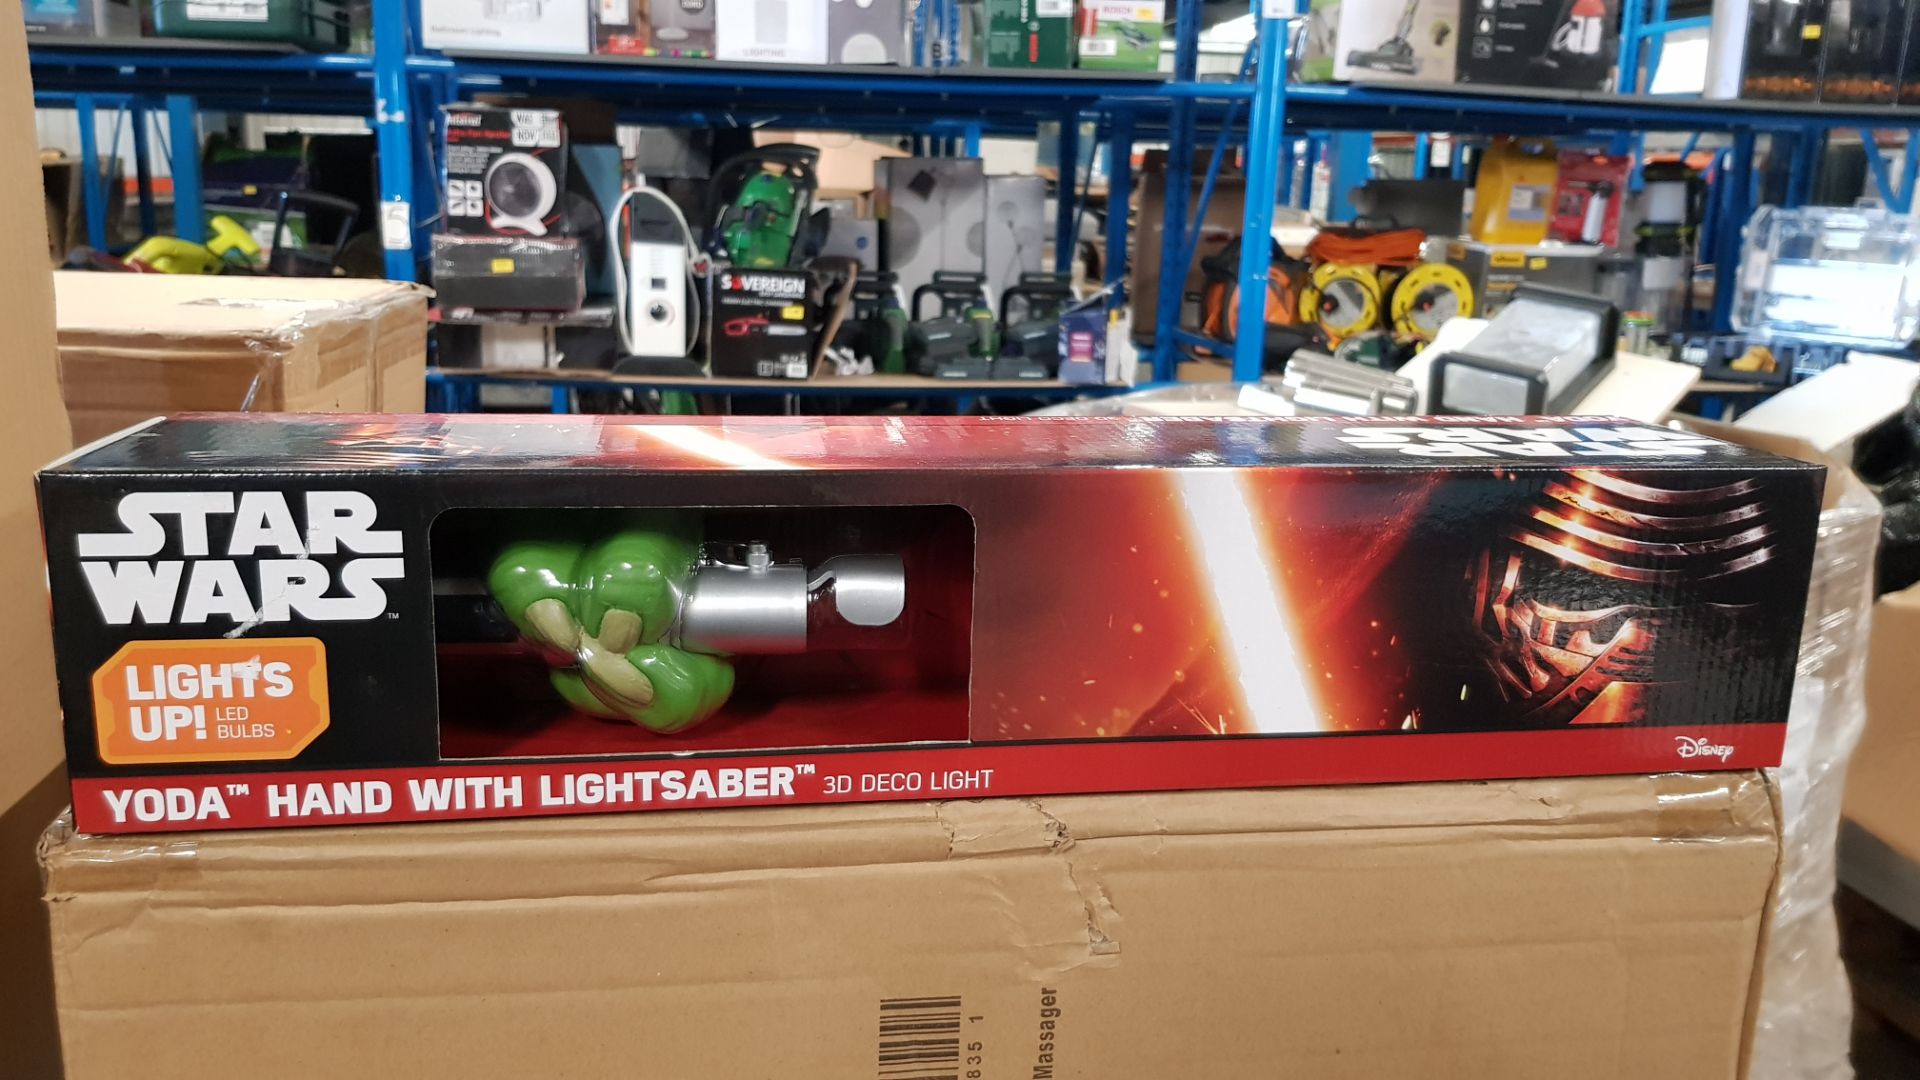 (7M) Lot RRP £120. 4x Star Wars Yoda Hand With Light Sabre 3D Deco Light RRP £30 Each. (All Units A - Image 6 of 6